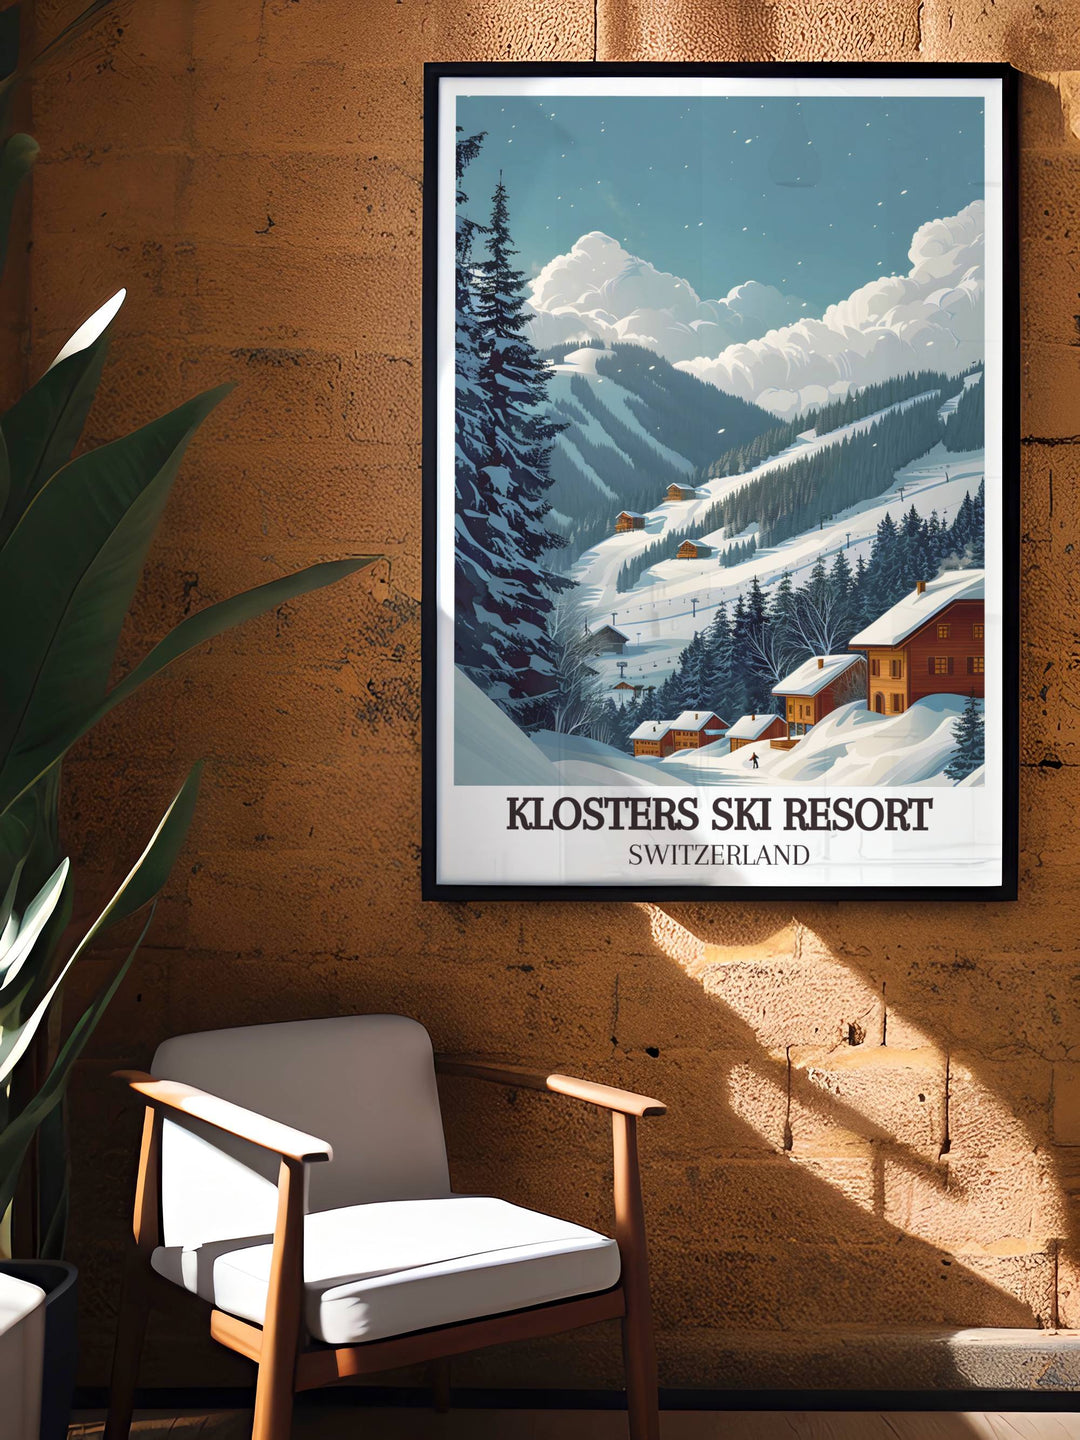 Celebrate the beauty of Klosters Ski Resort with our stunning Wall Art. This Ski Resort Poster captures the charm and excitement of skiing in Klosters making it a perfect gift for winter sports enthusiasts and fans of vintage artwork